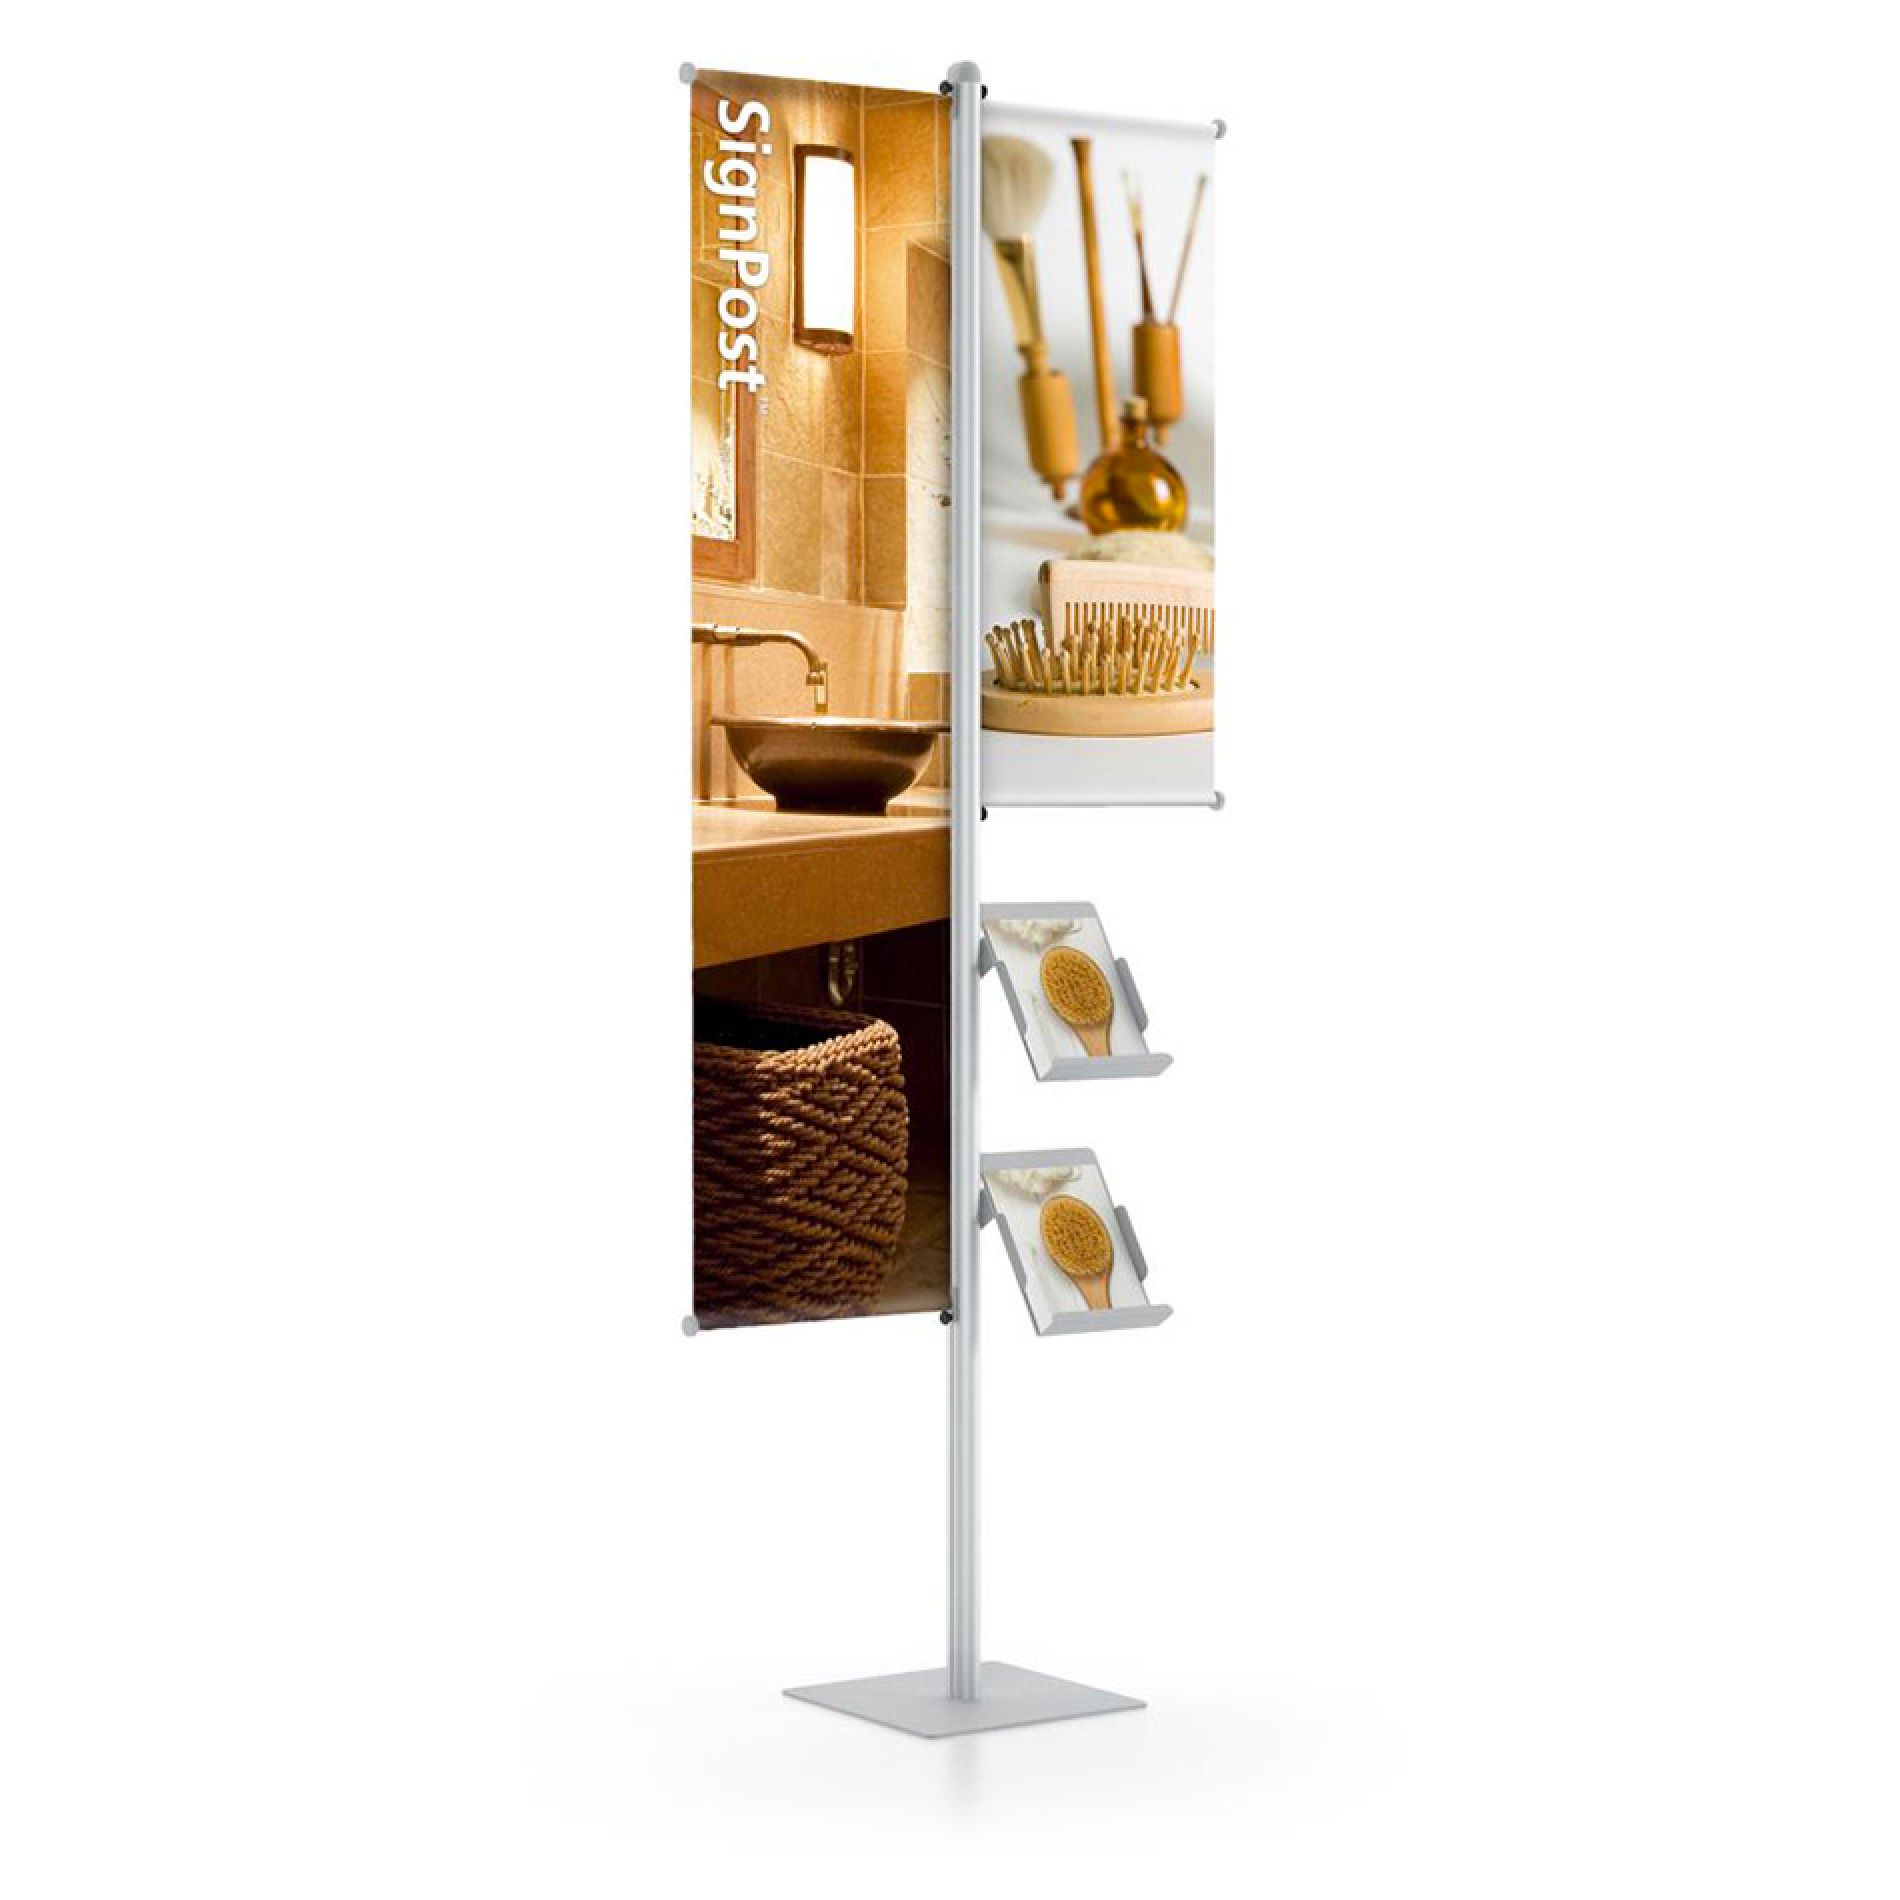 Harmony Banner Stands™ Gallery Image